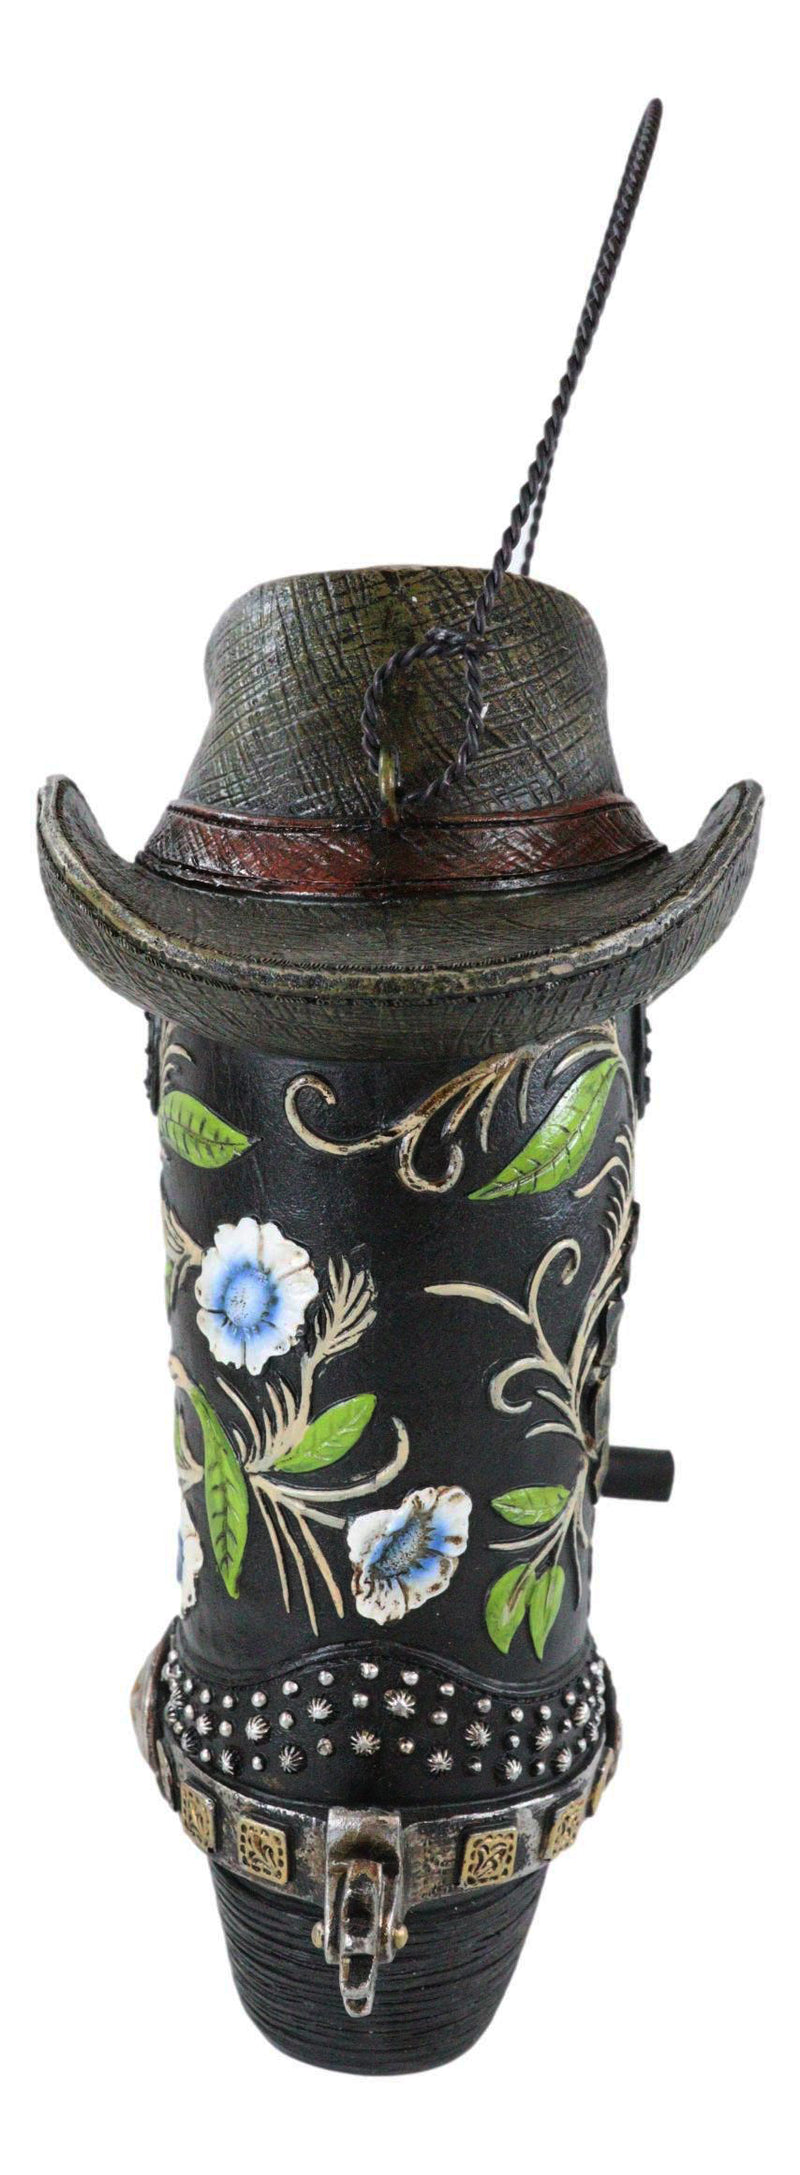 Pack Of 2 Western Red And Black Floral Cowboy Boots Birdhouse Bird Feeder Hanger